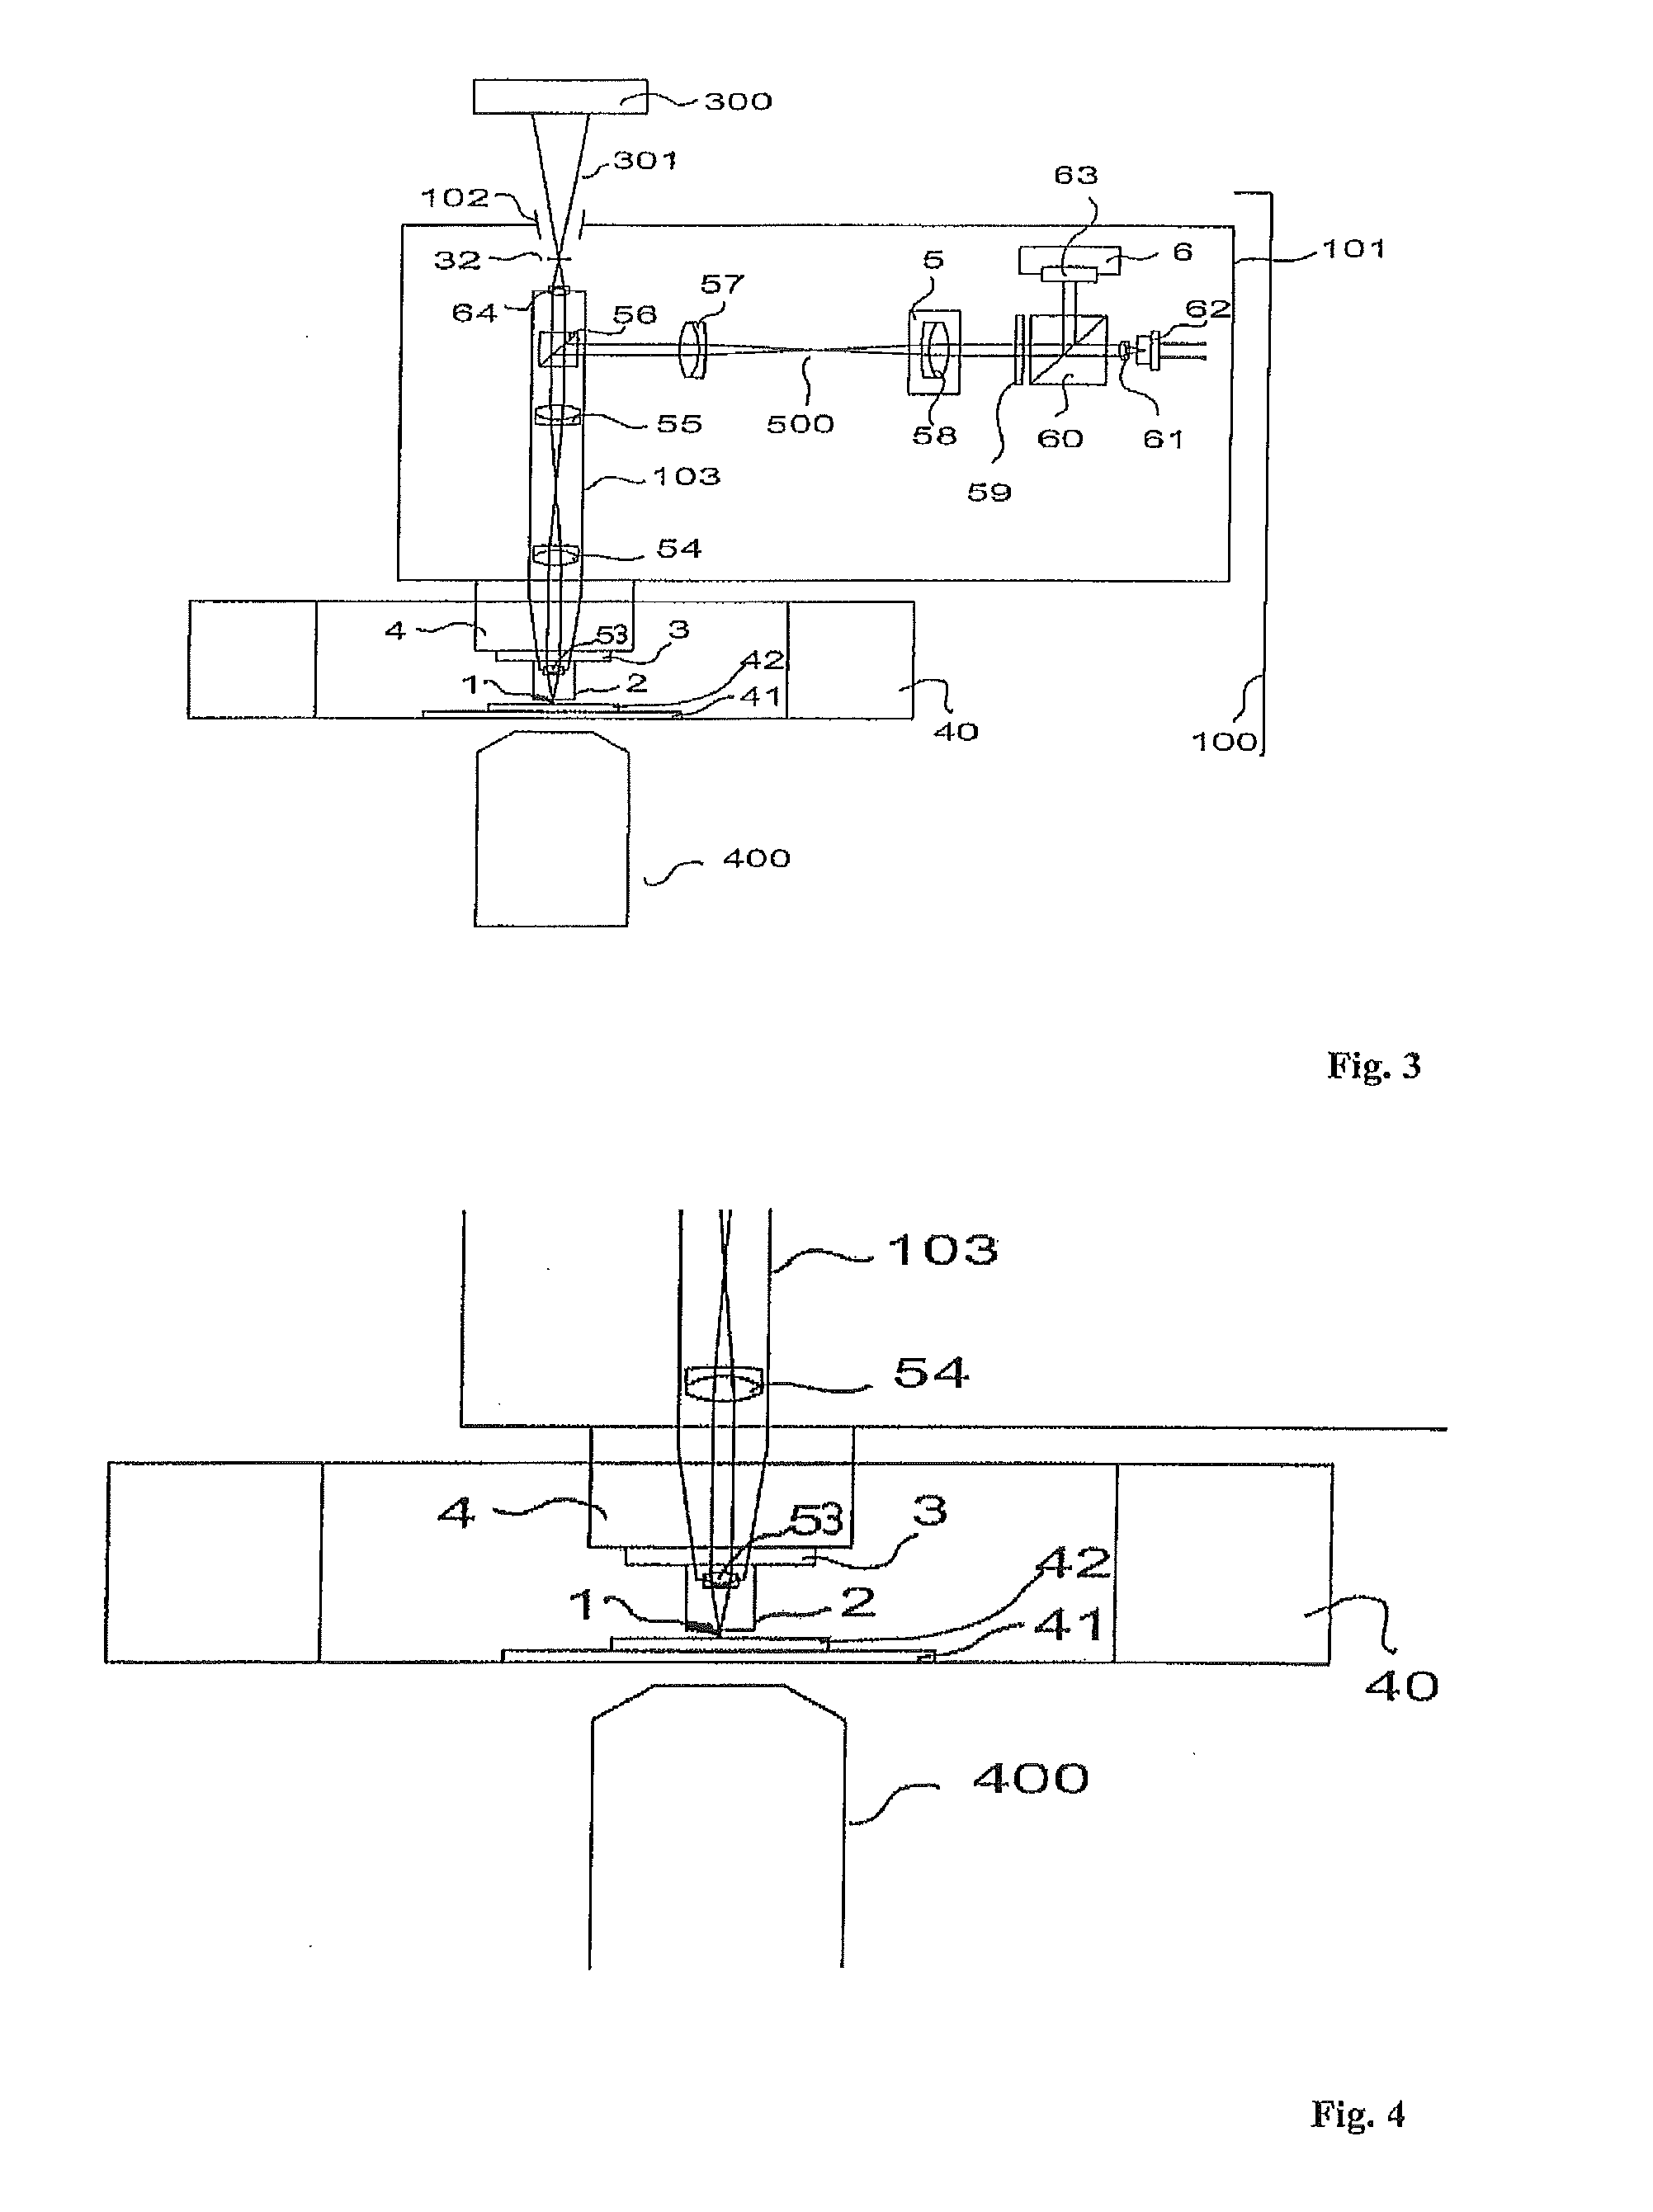 Apparatus and method for examining a specimen by means of probe microscopy